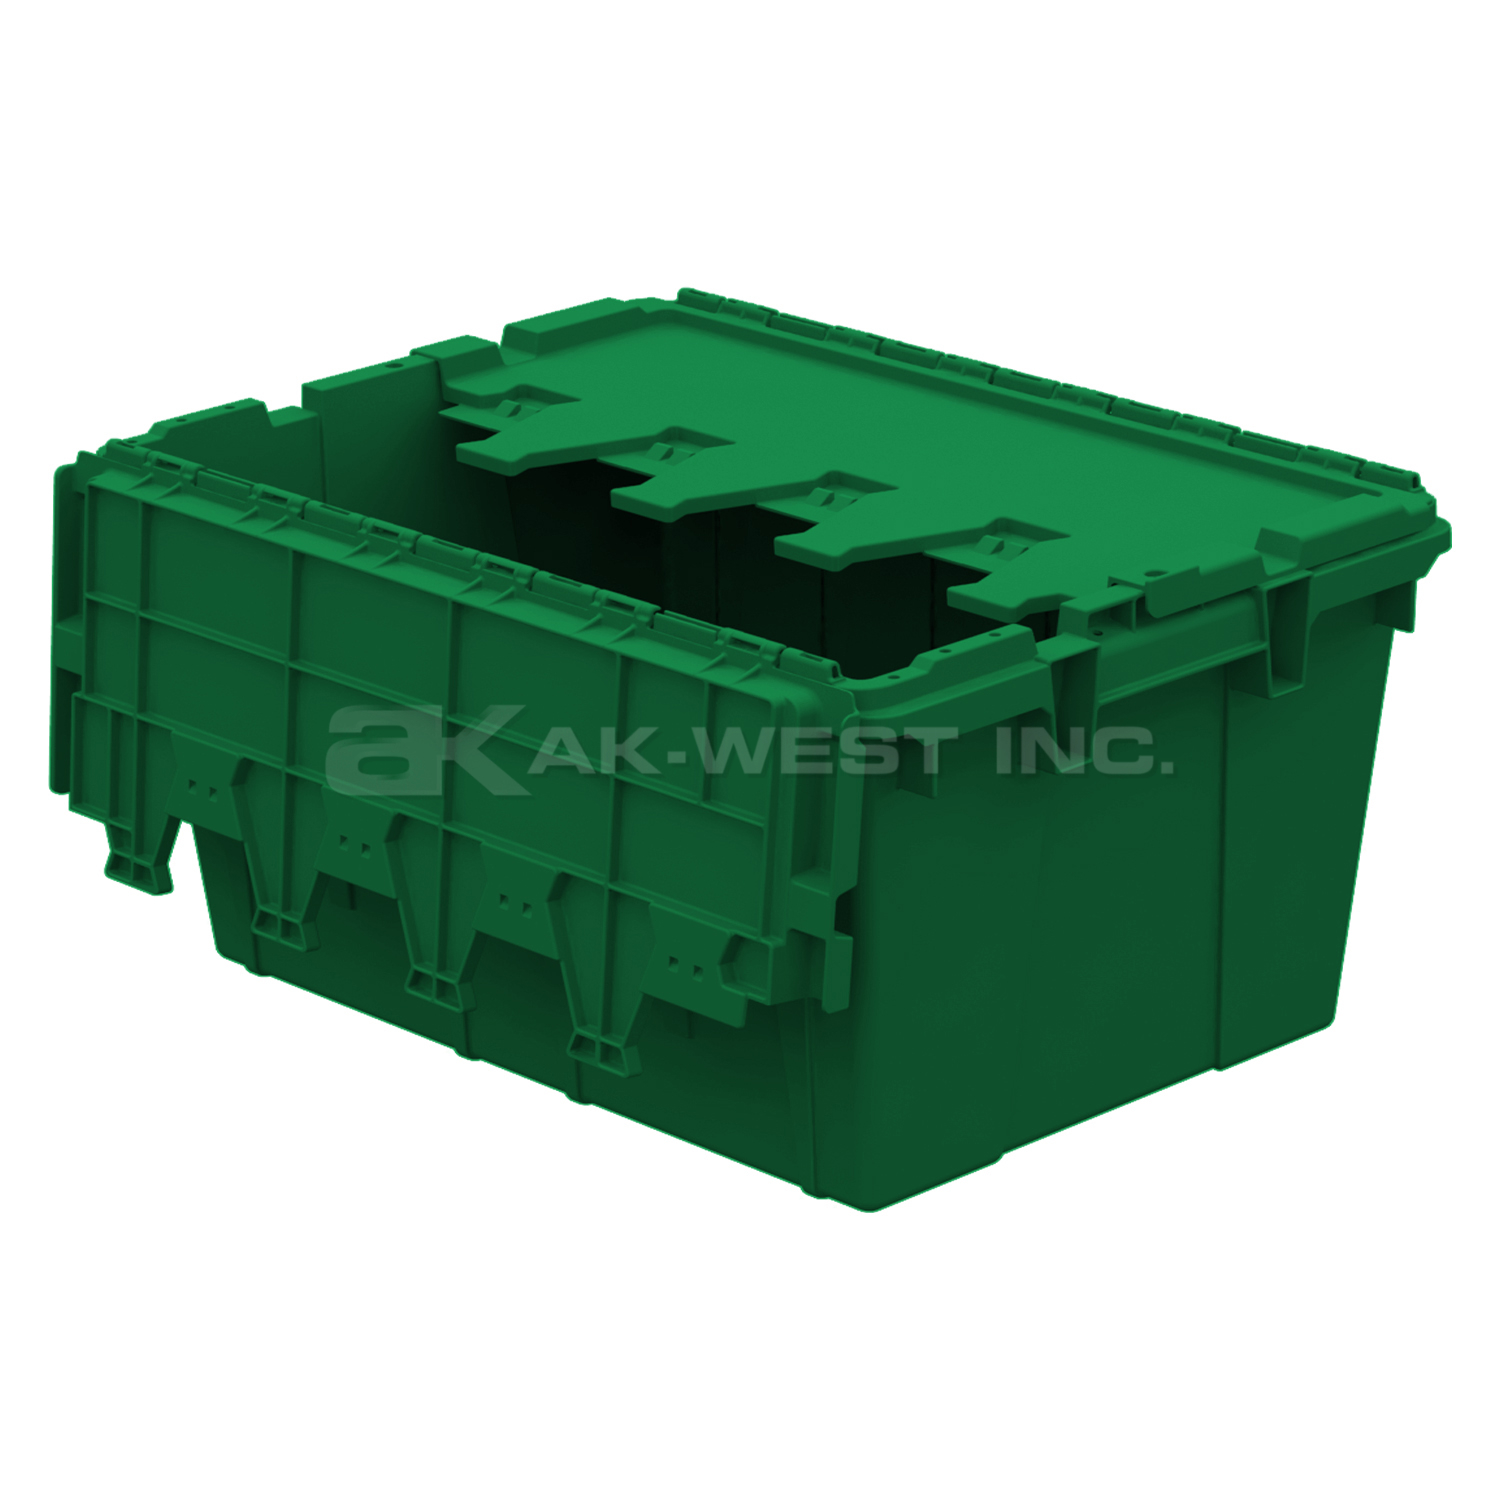 Green, 21" x 15" x 9" Attached Lid Container, Traction Bottom